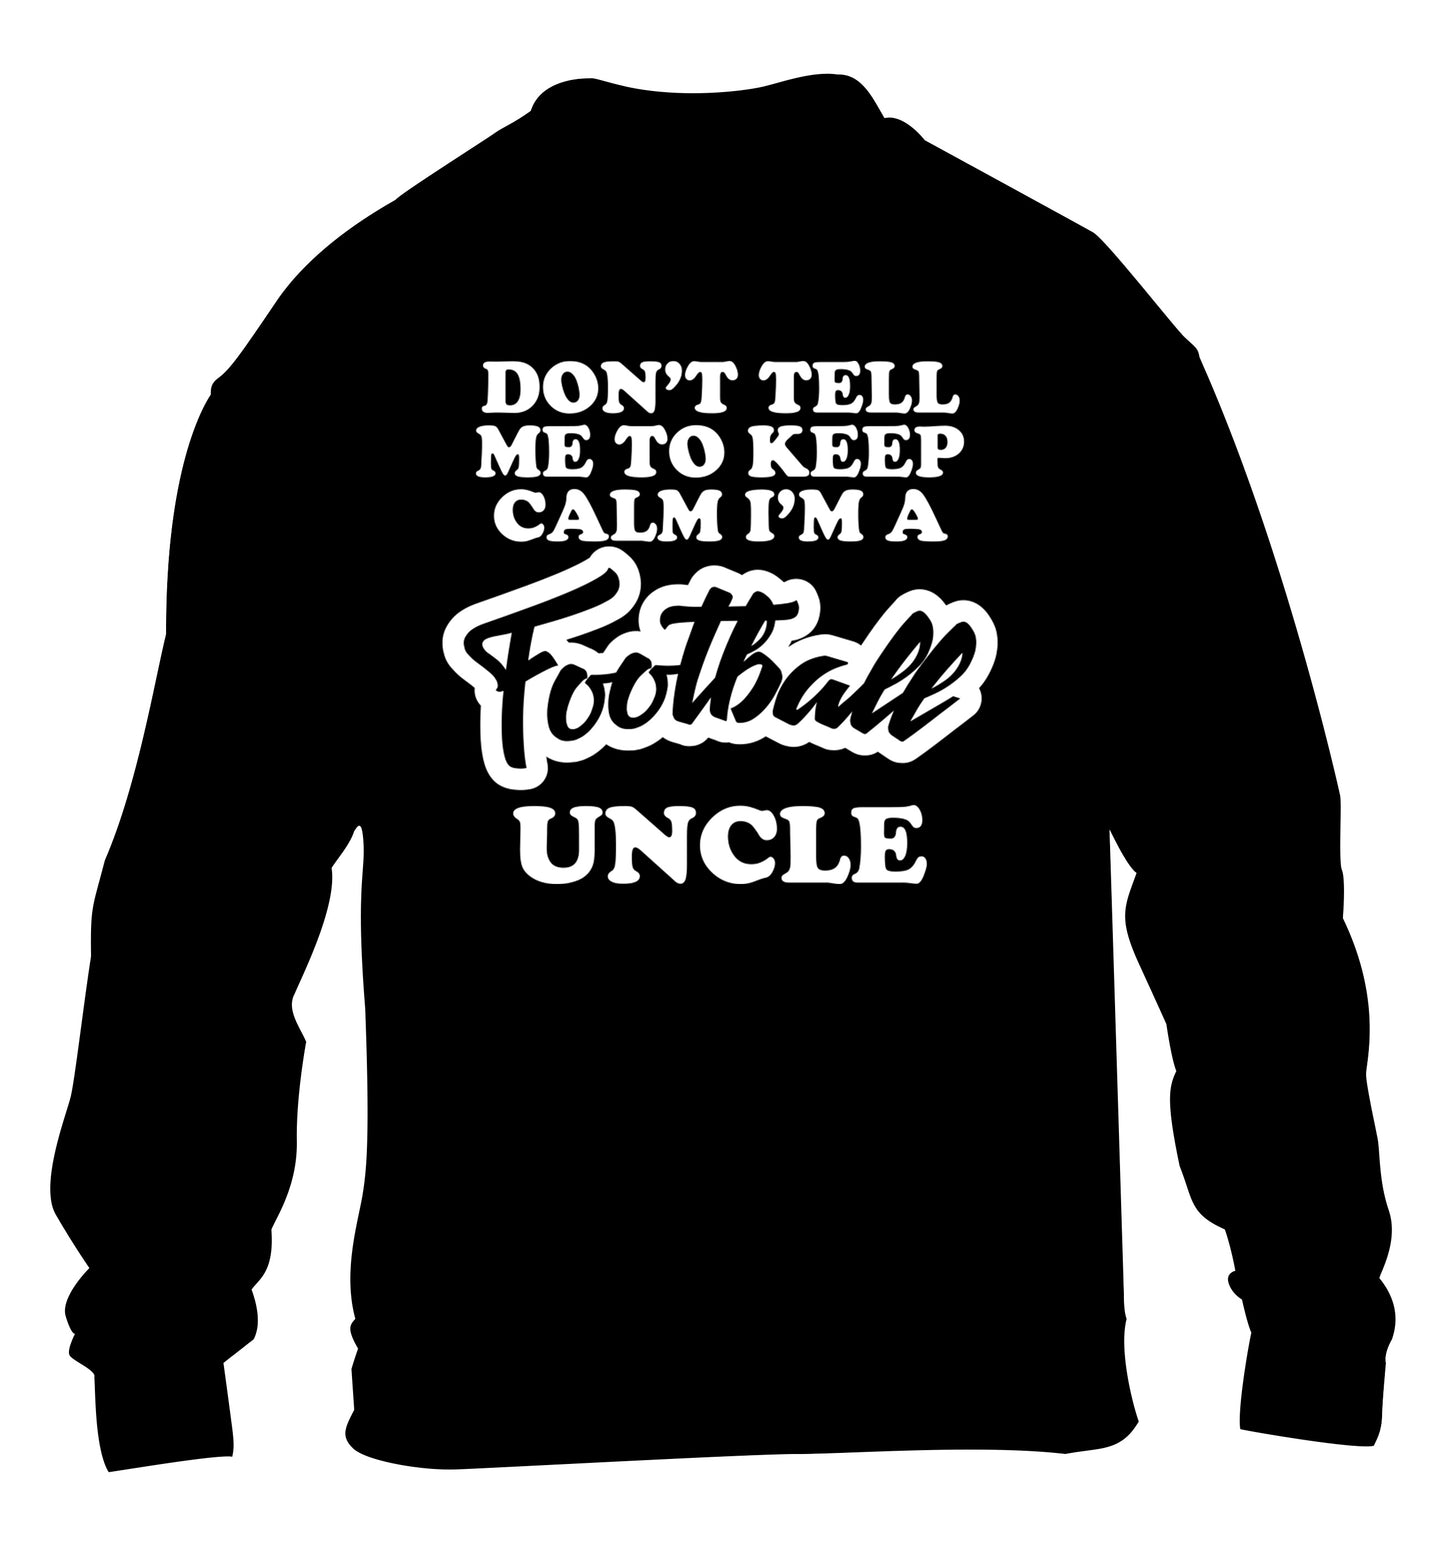 Don't tell me to keep calm I'm a football uncle children's black sweater 12-14 Years